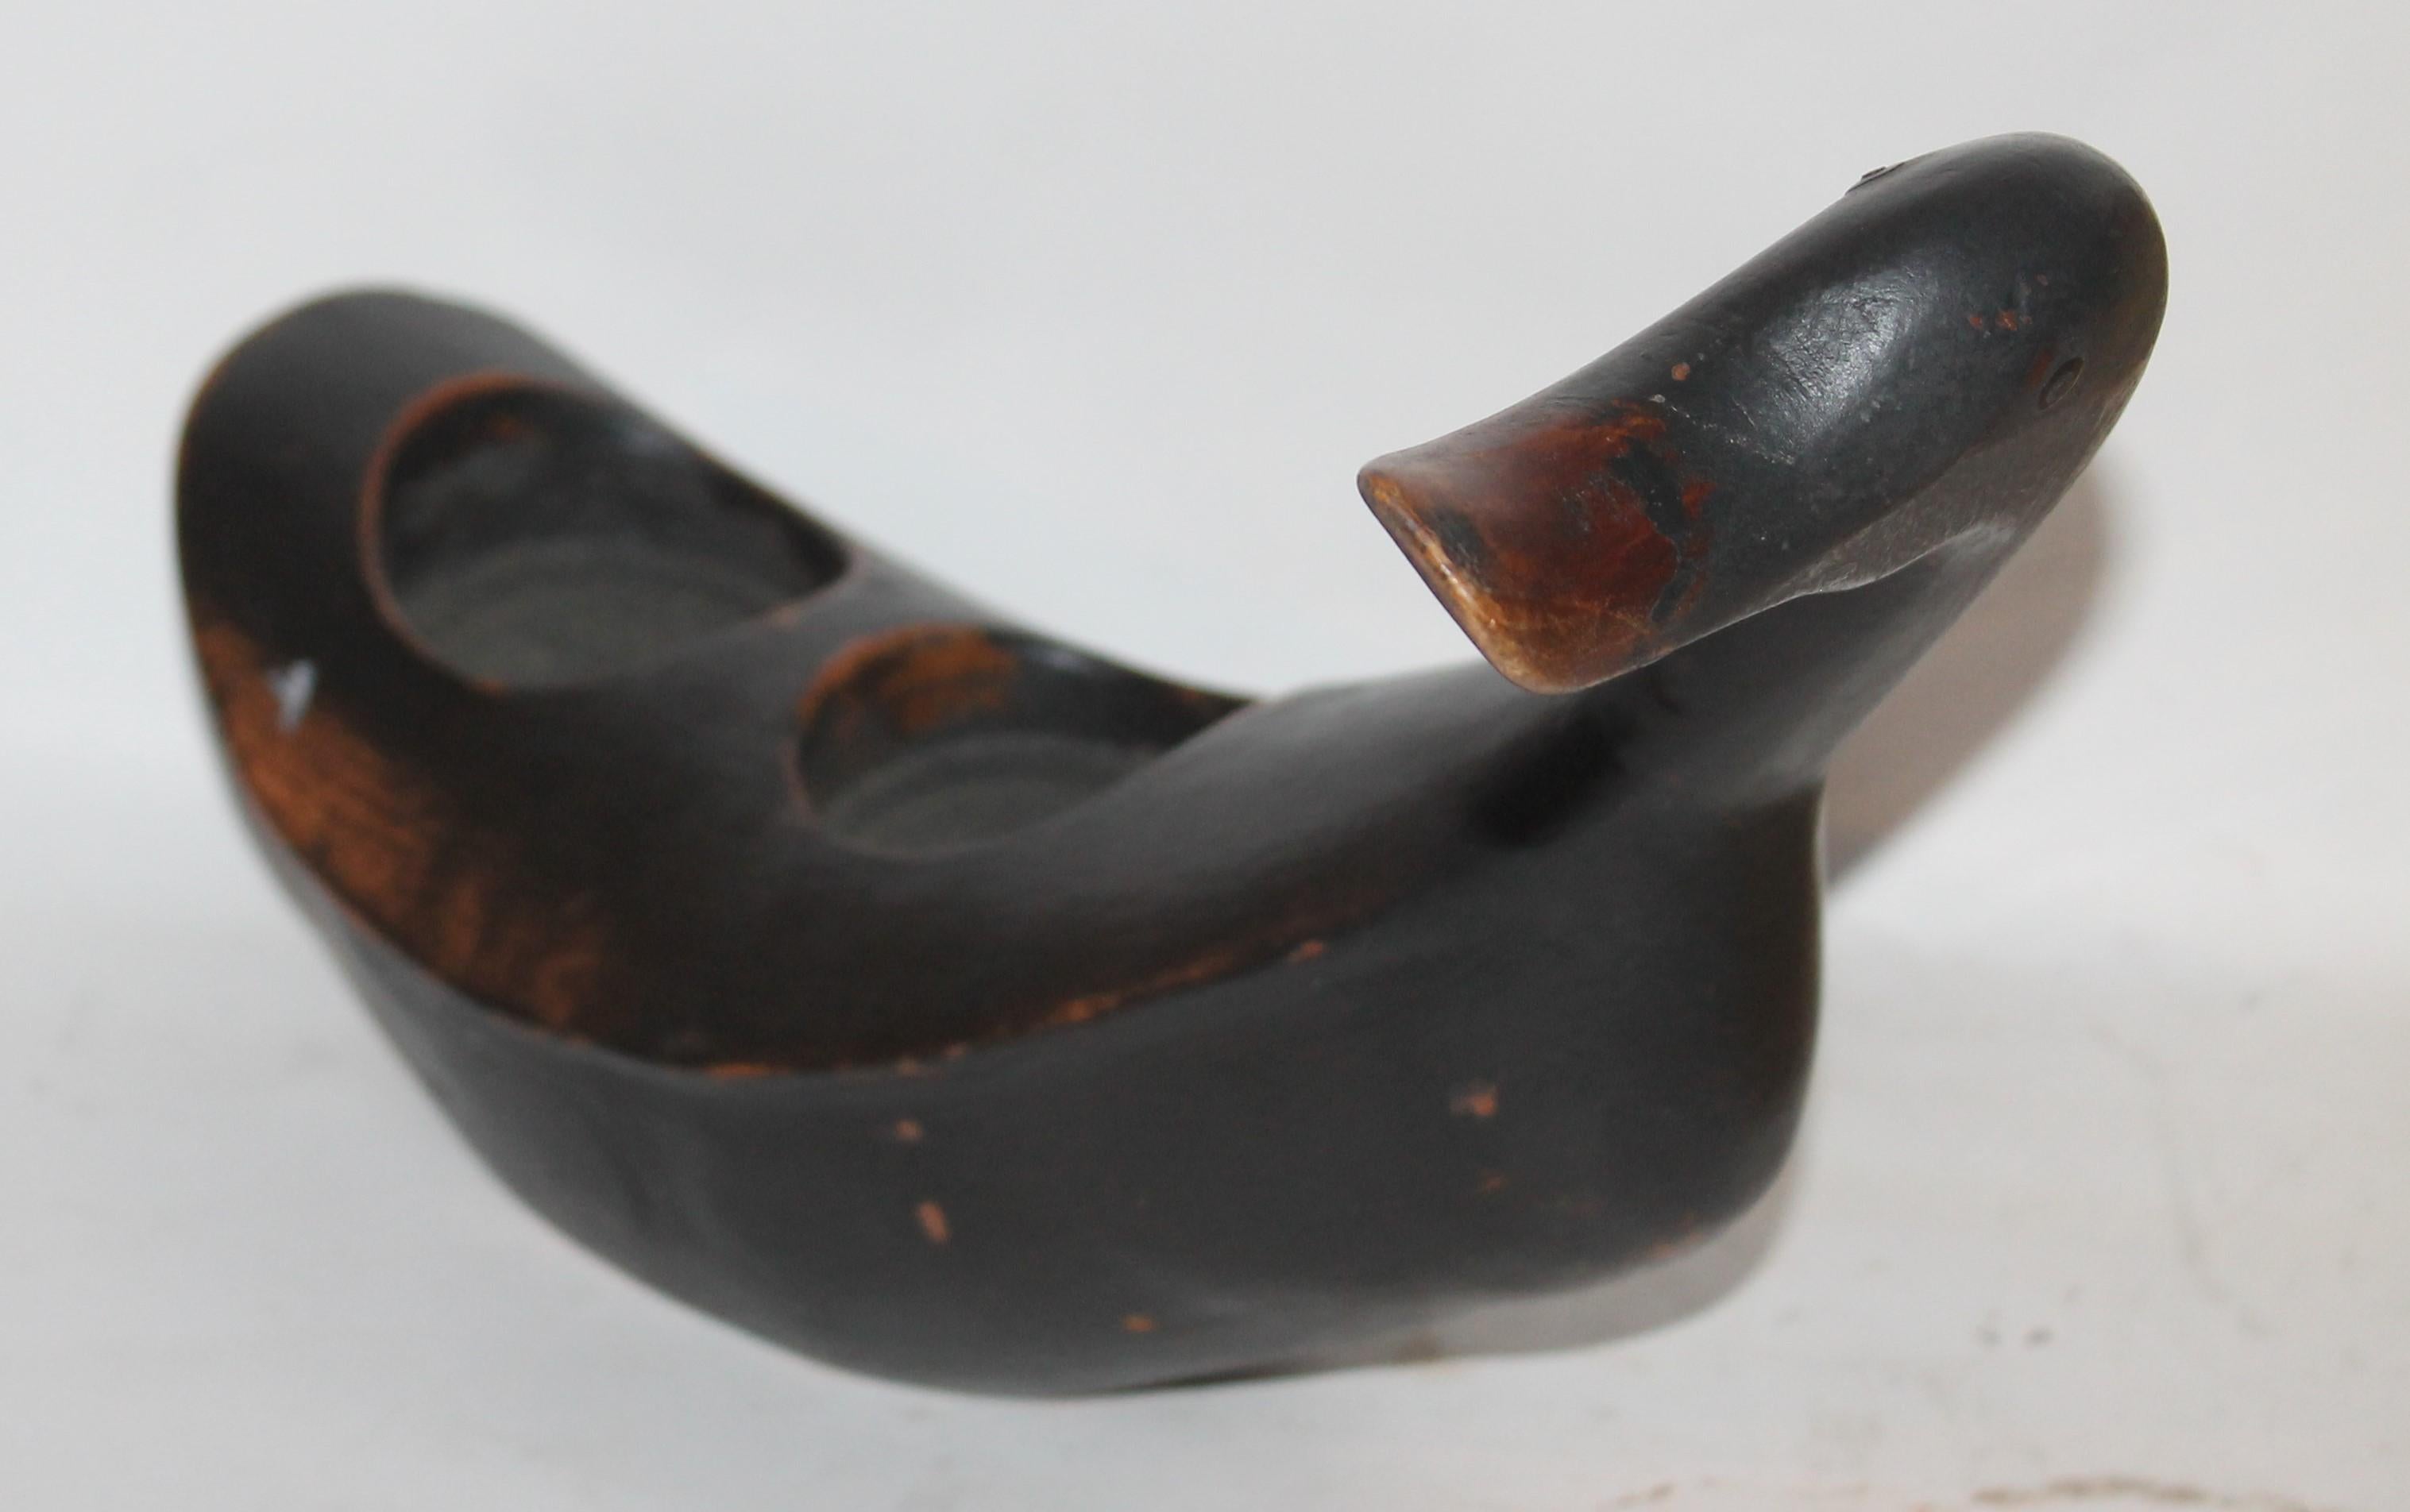 This folky hand carved and painted black duck is in good condition and has odd cutout for drinks or something special.